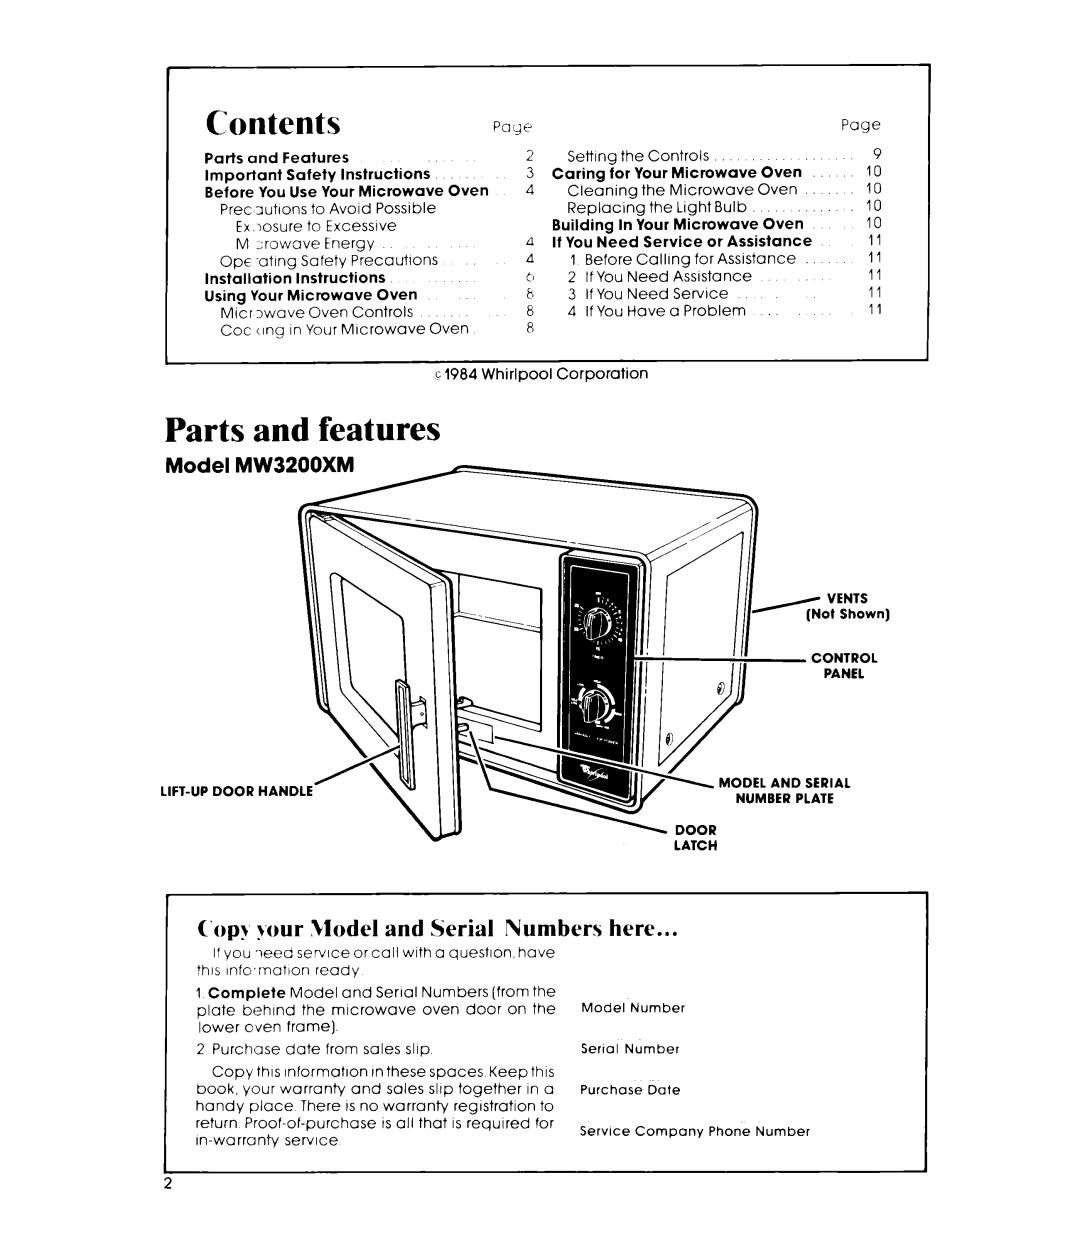 Whirlpool MW3200XM manual Contents, Parts and features, C‘op~,your Model and Serial Numbers here, Model MW---‘ 